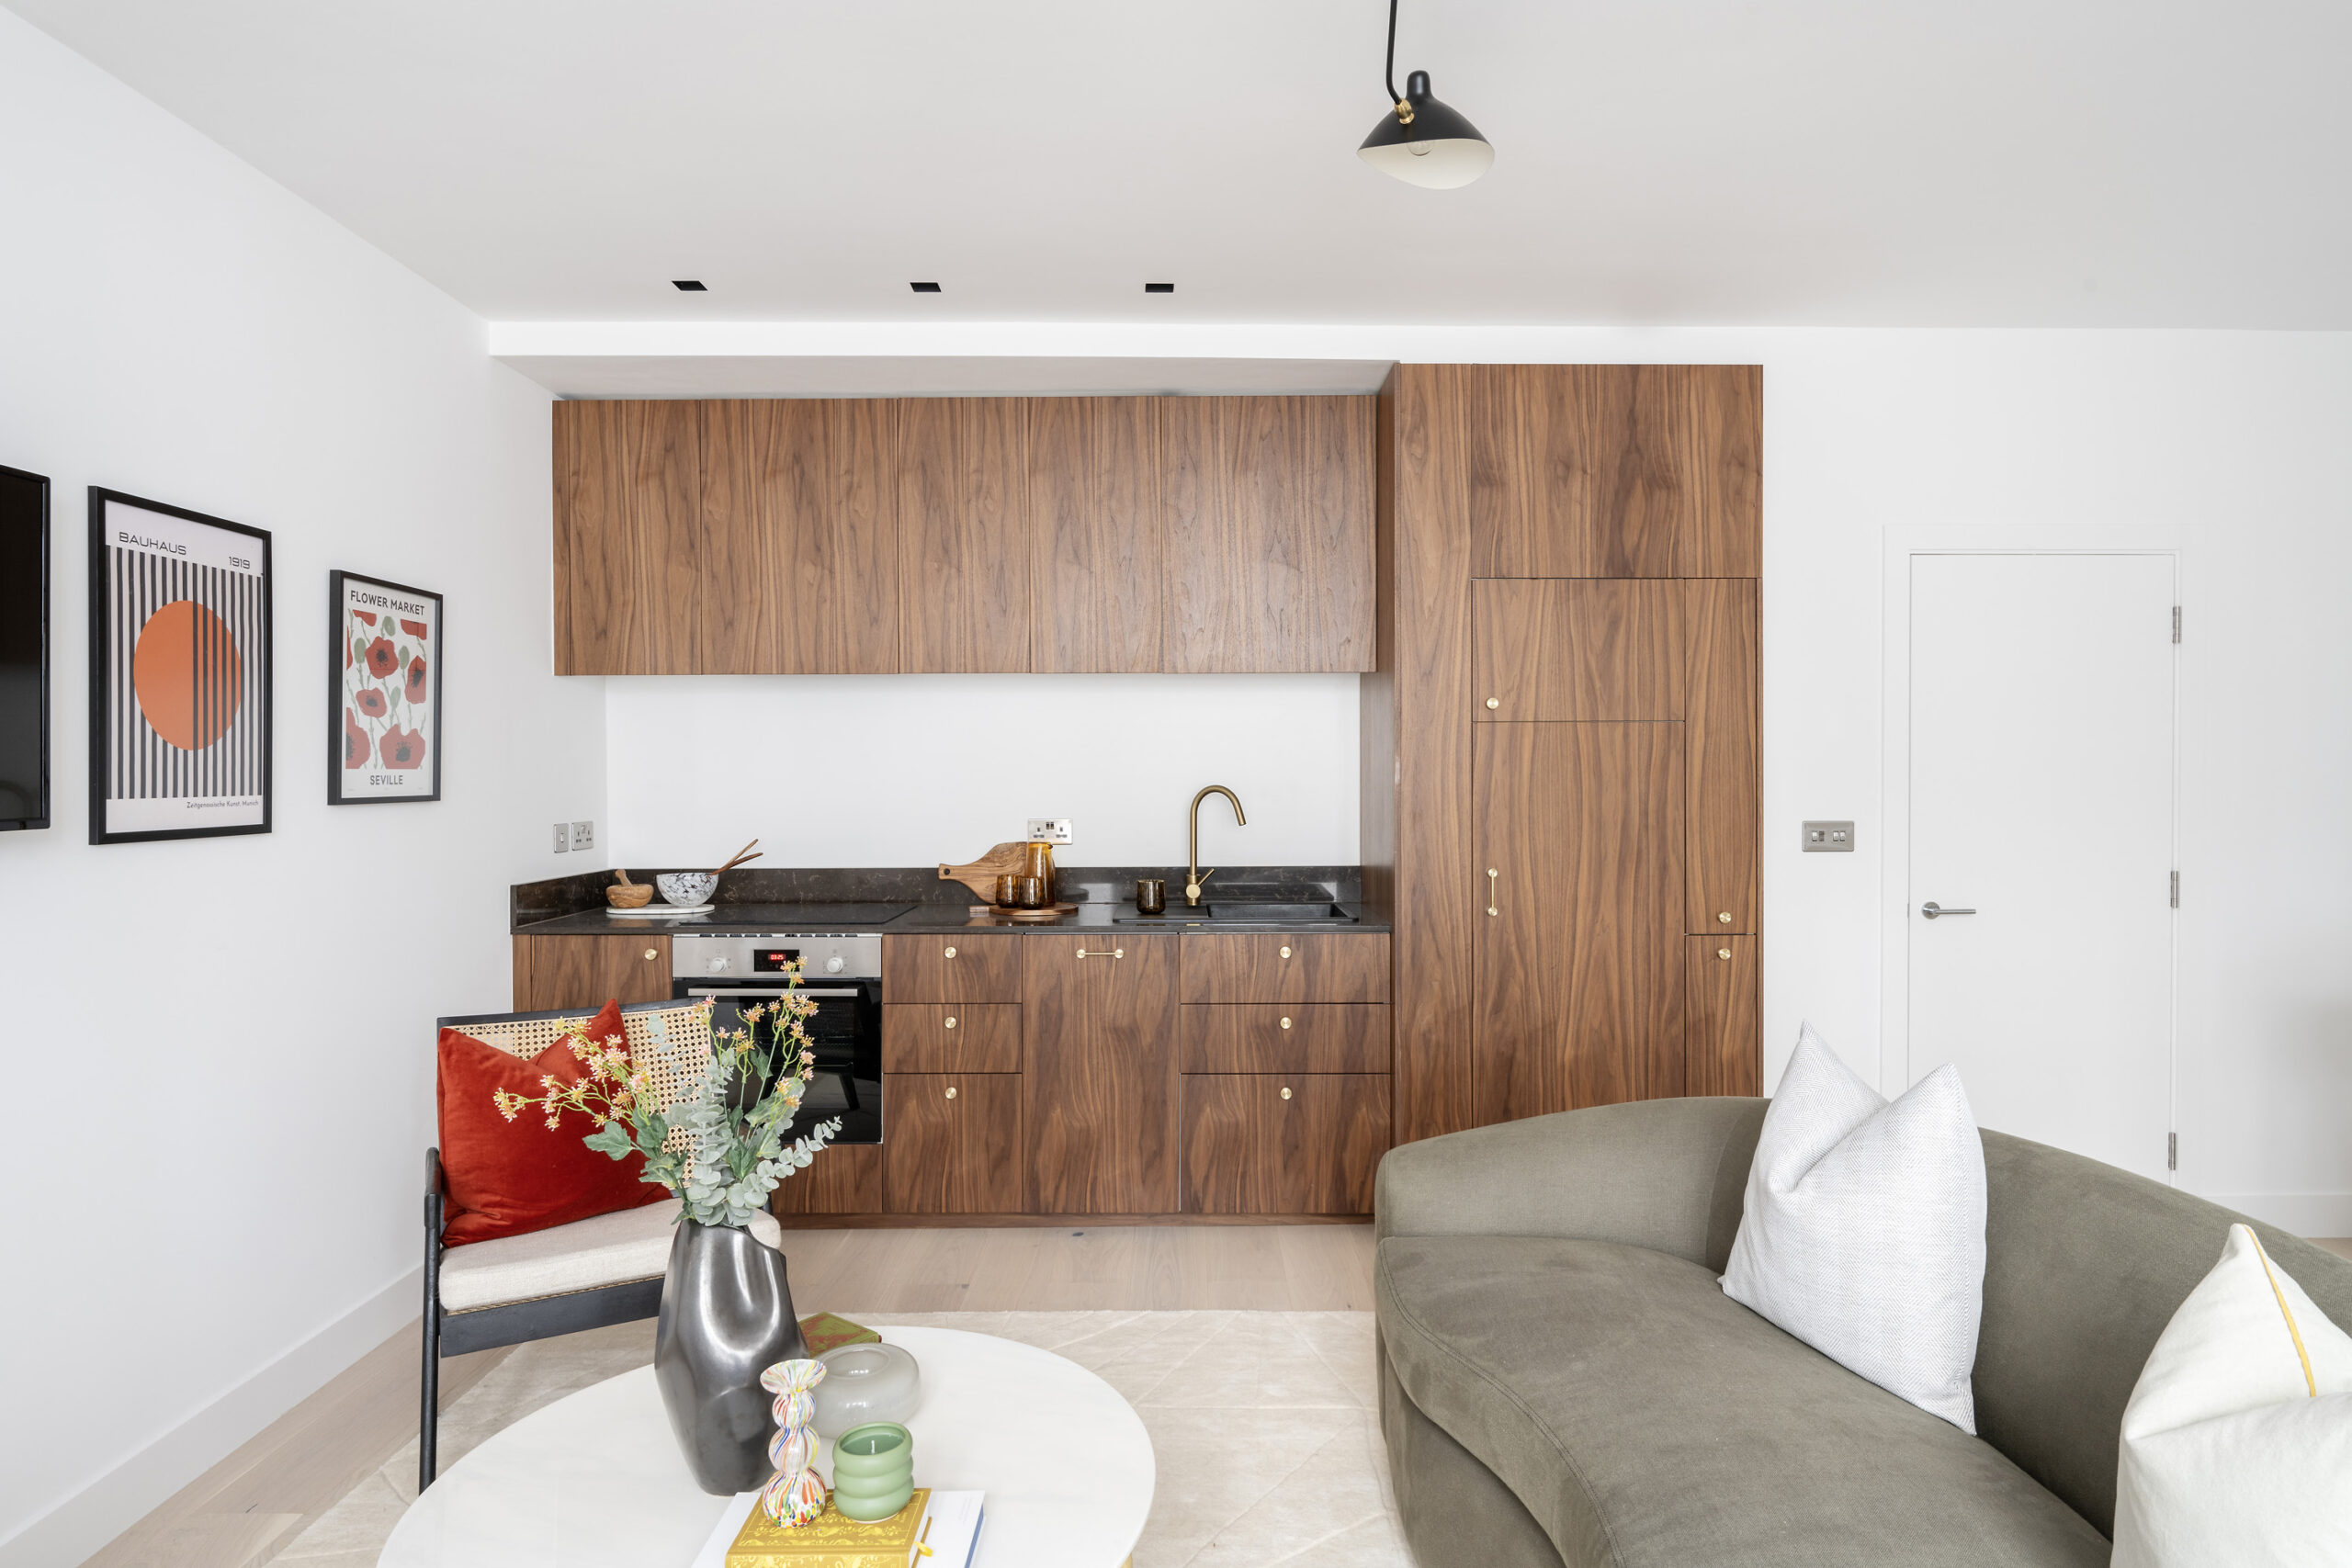 Contemporary open-plan kitchen of a luxury two-bedroom maisonette for sale